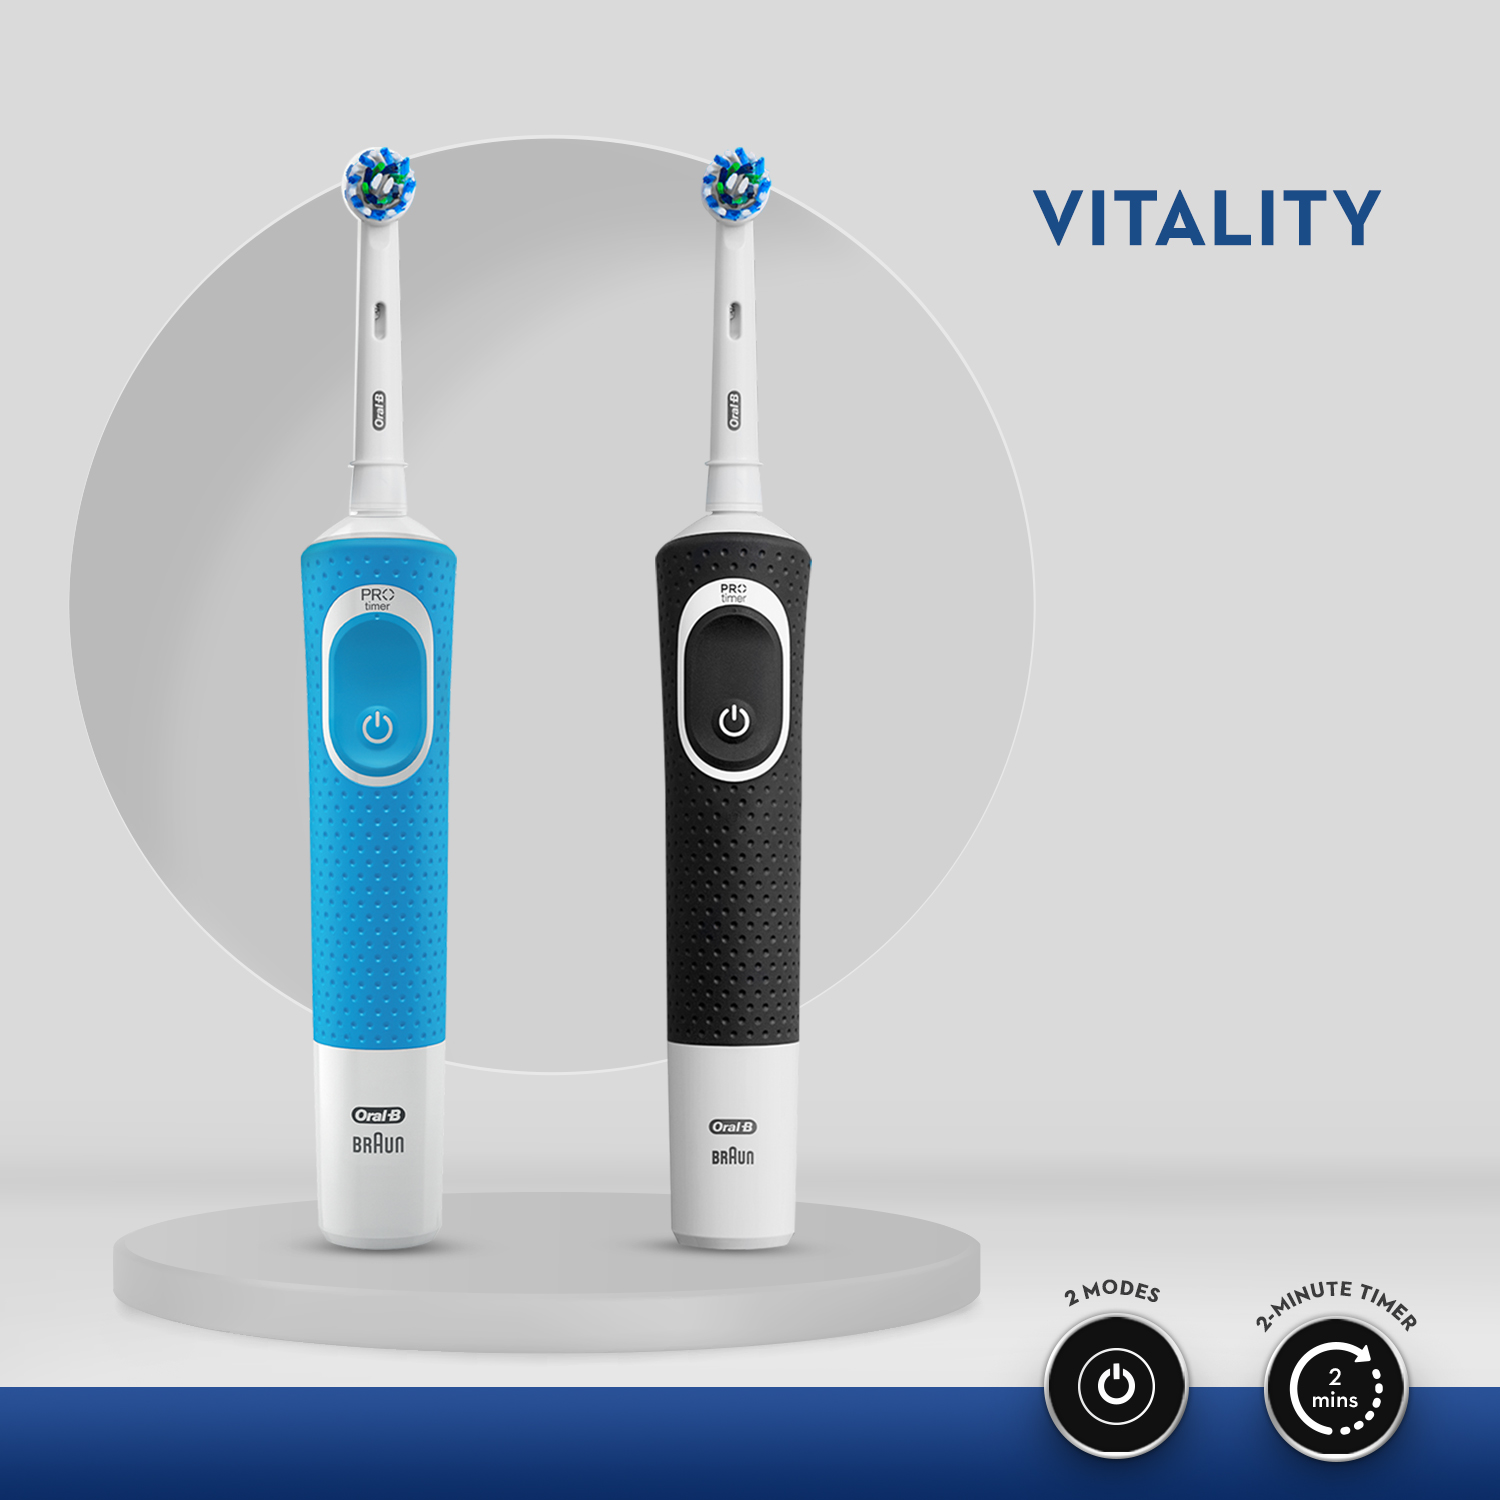 Oral B Vitality 100 Blue Criss Cross Electric Rechargeable Toothbrush Powered by Braun and Oral B Vitality 100 Black Criss Cross Electric Rechargeable Toothbrush Powered by Braun